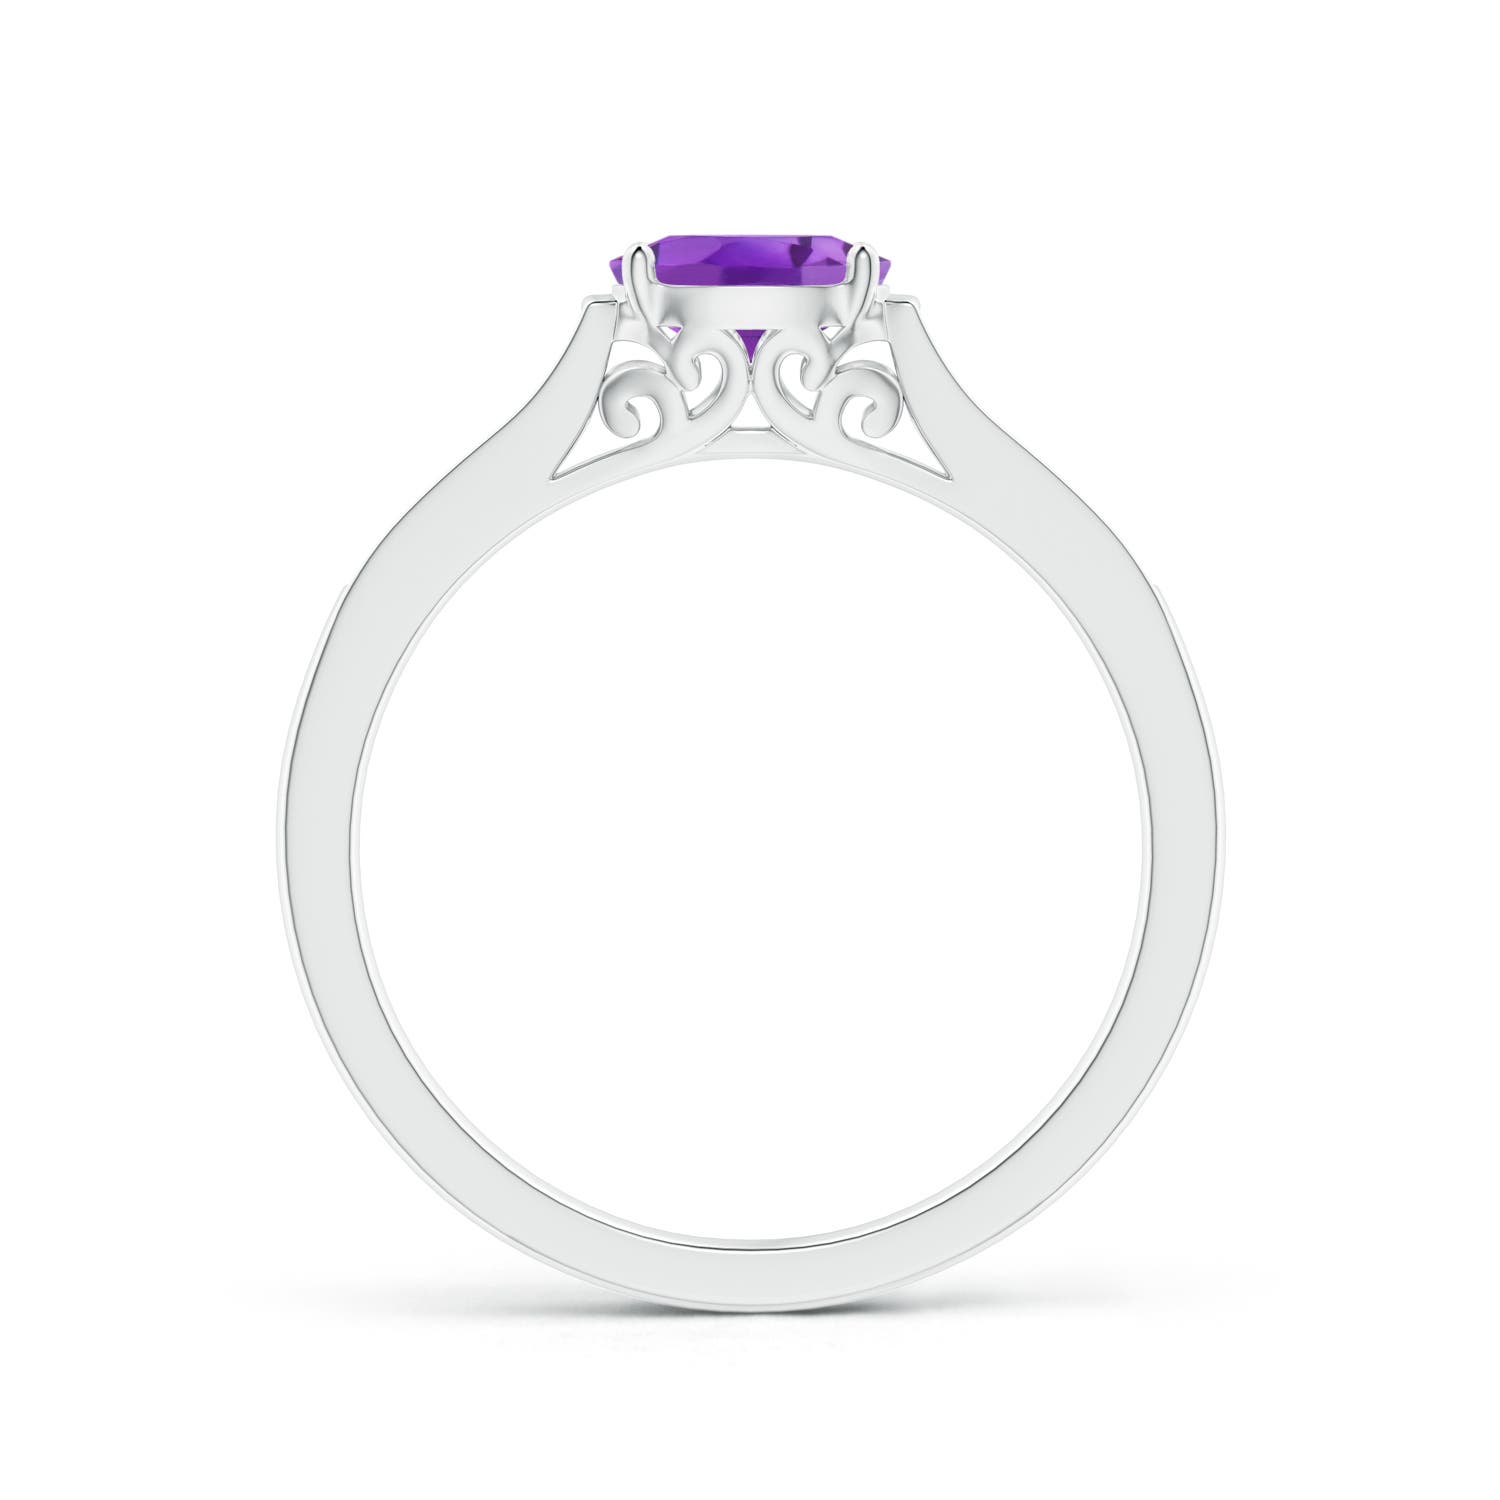 AA - Amethyst / 0.5 CT / 14 KT White Gold